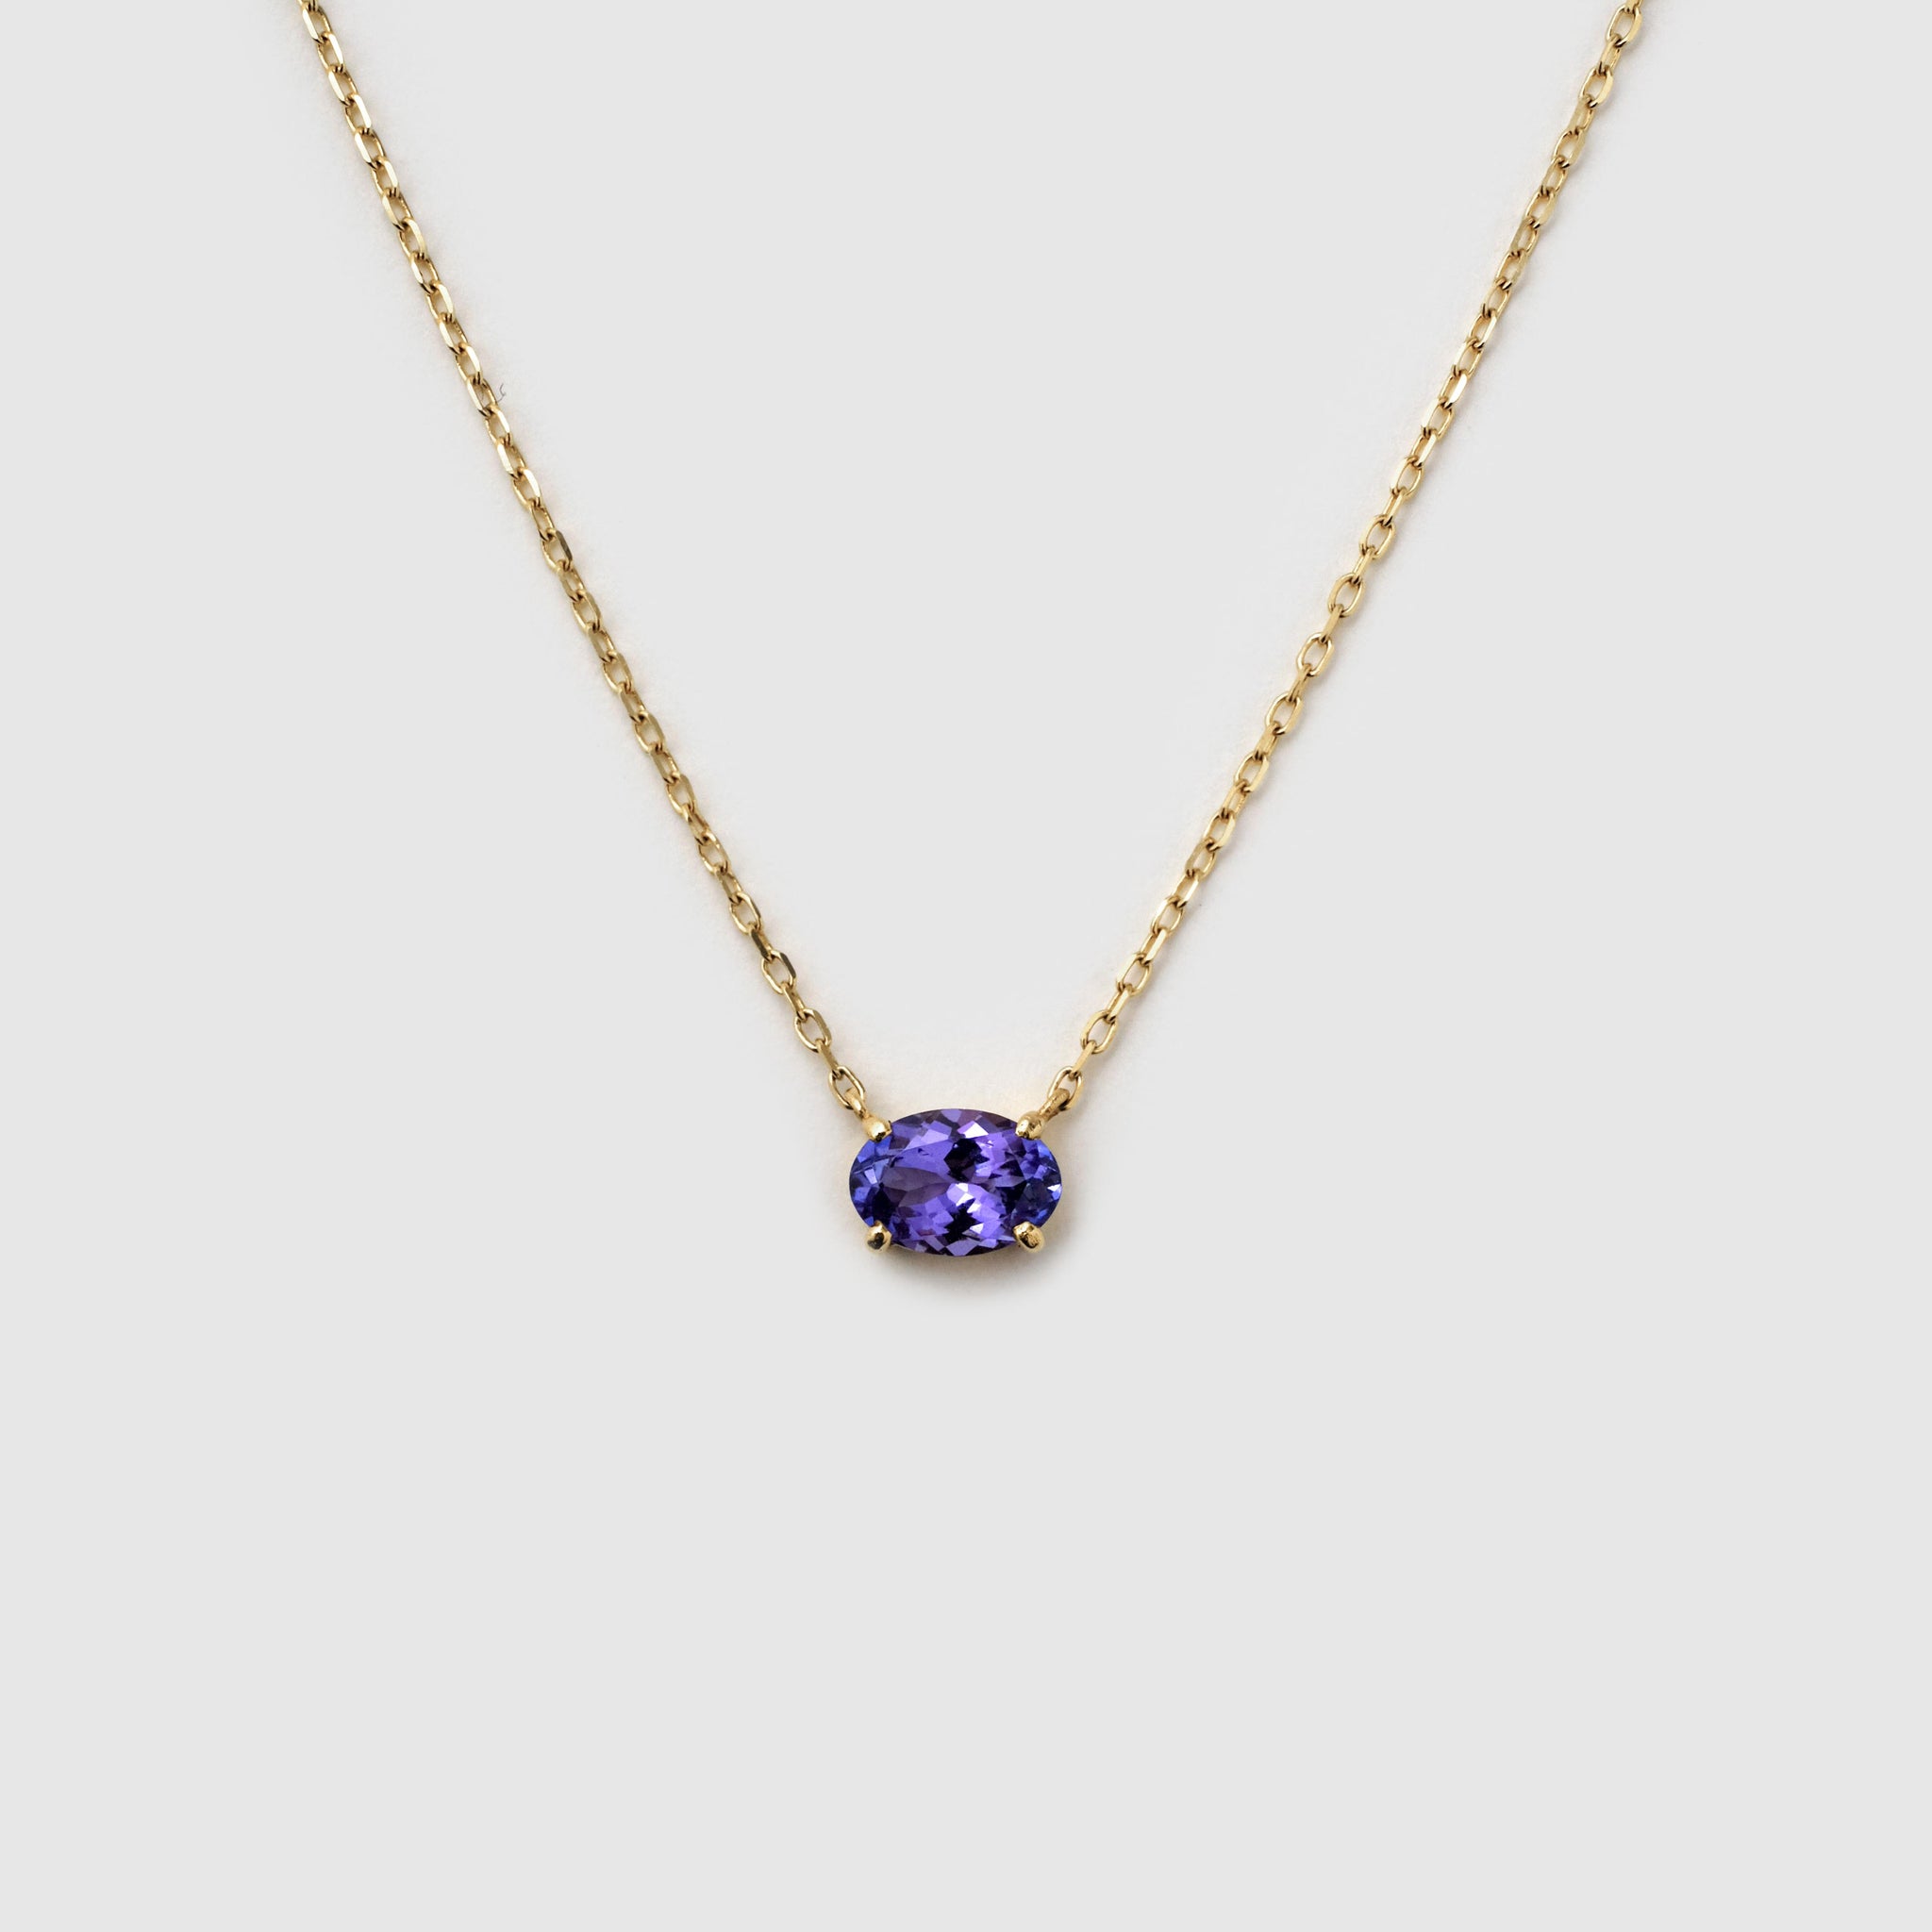 Oval Shape Tanzanite Necklace, 18k solid gold